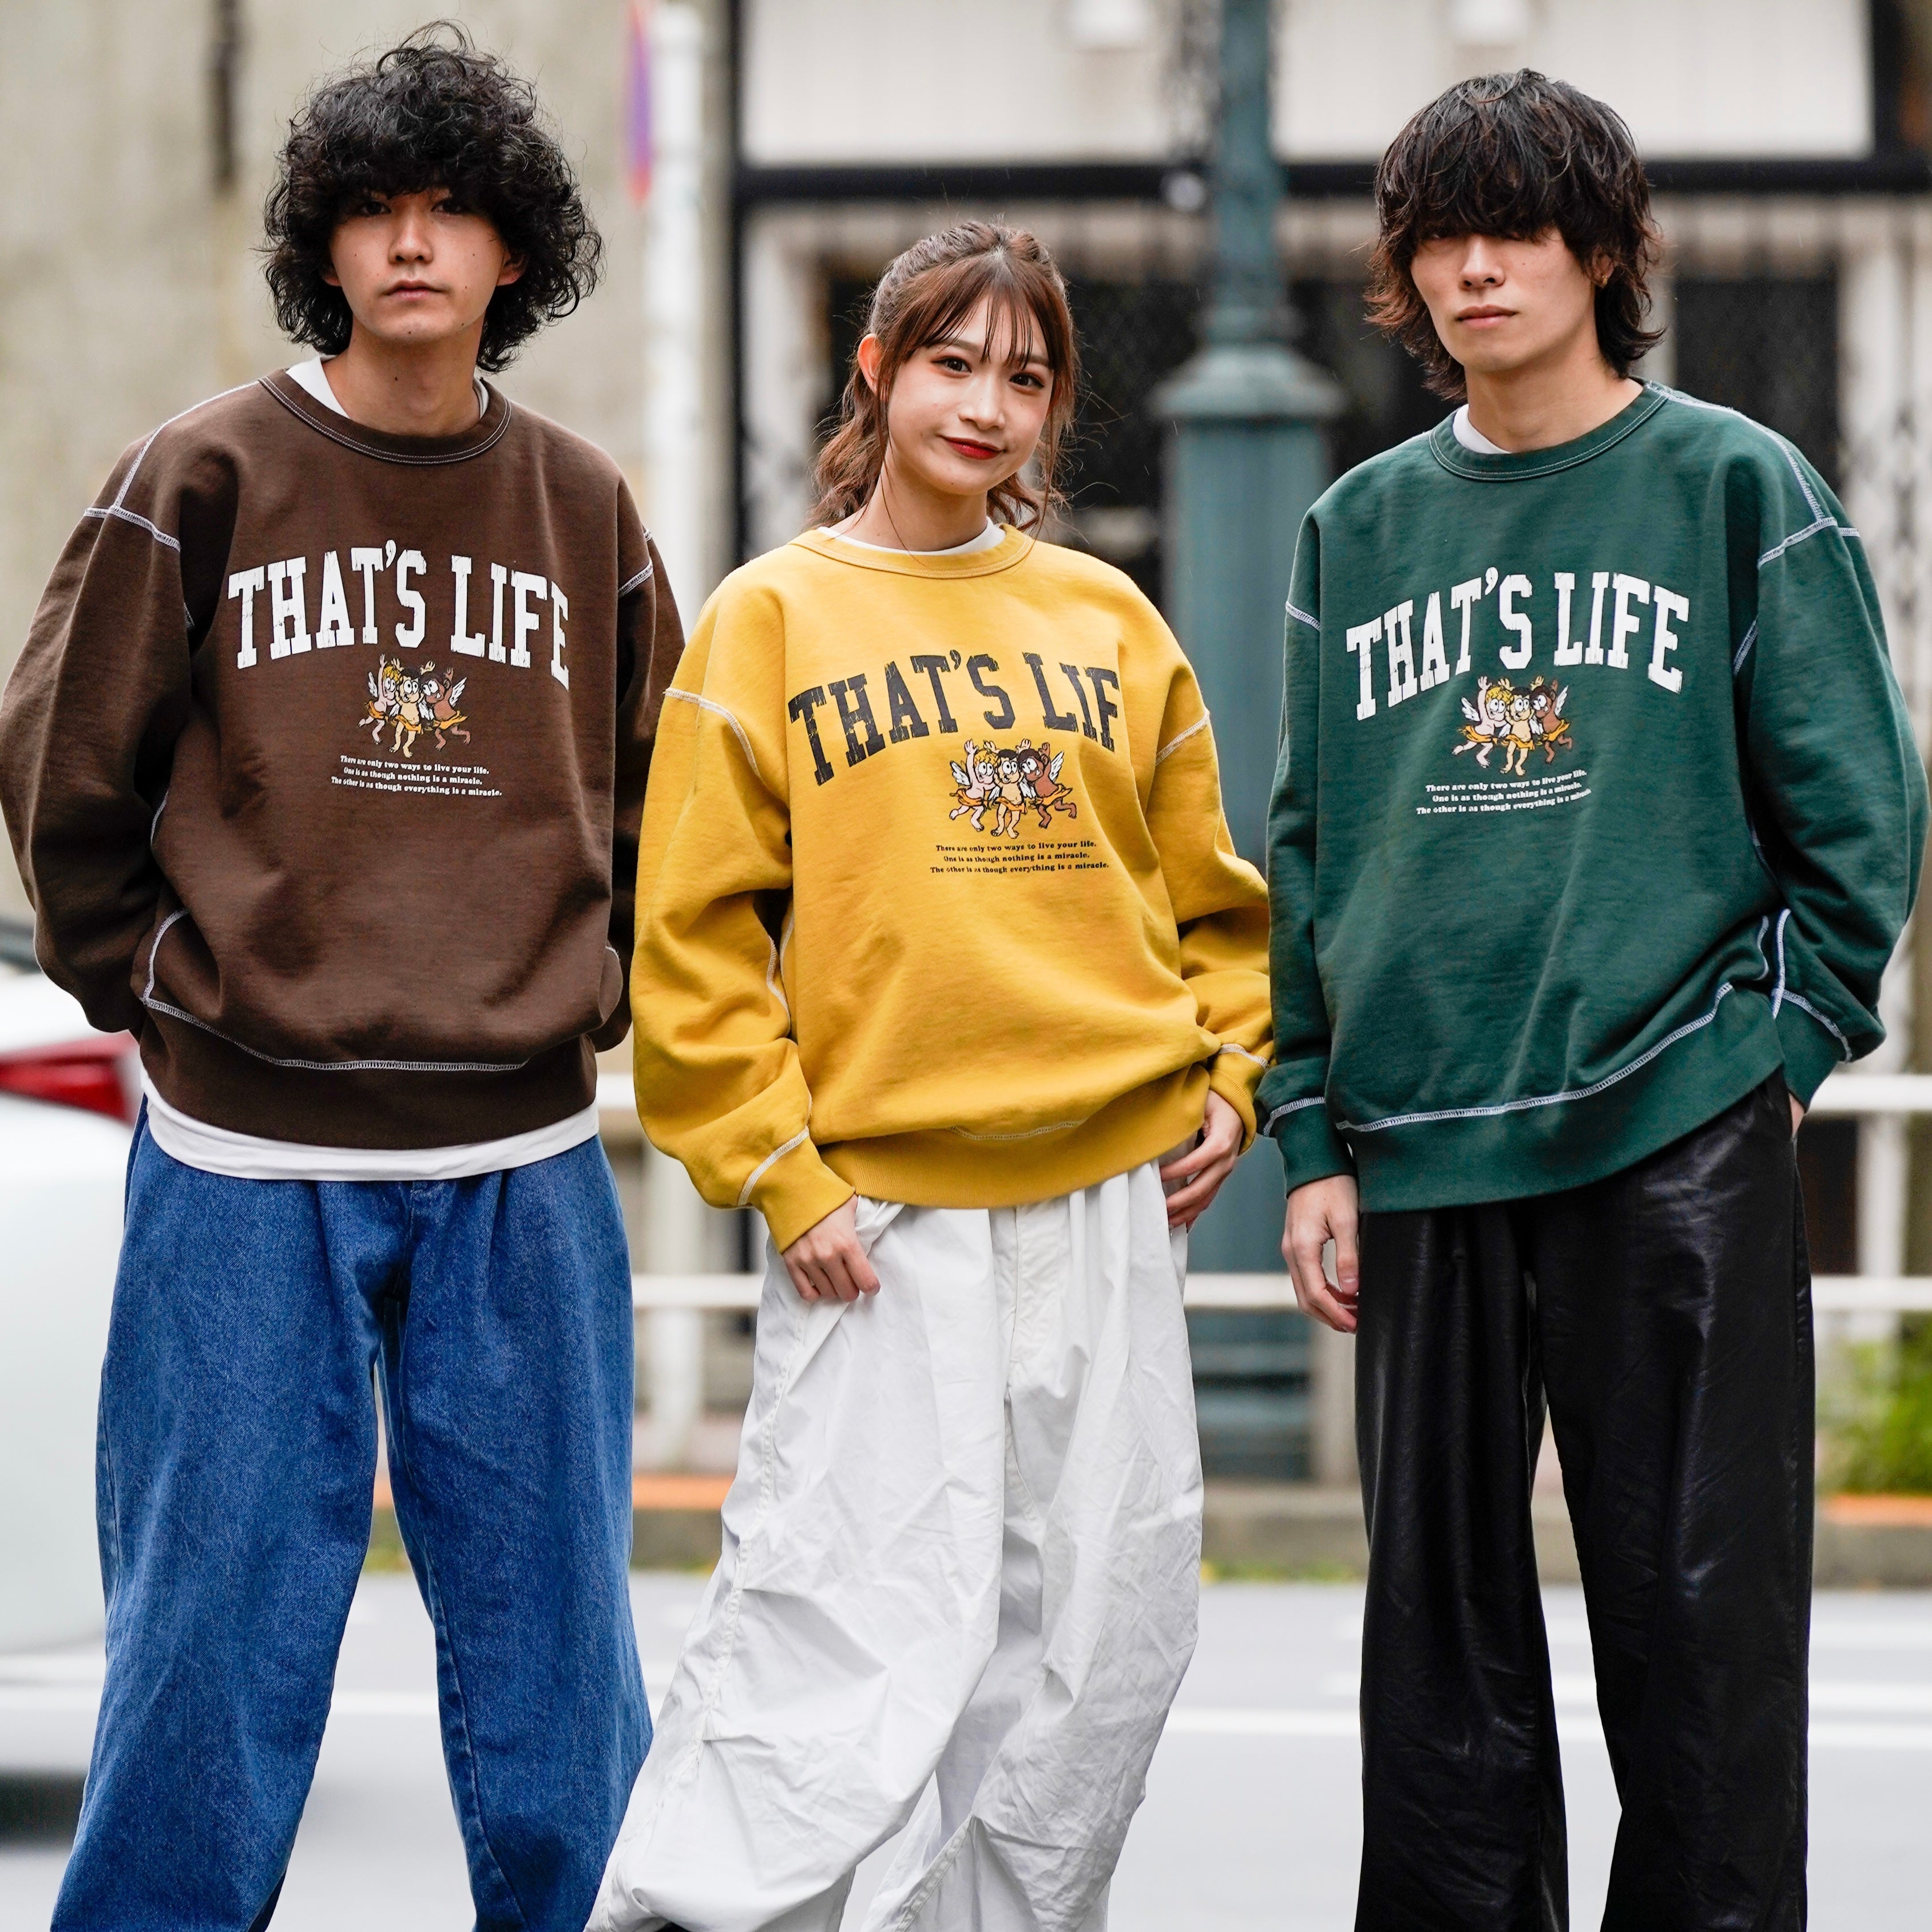 Vintage styles Big Logo Sweat – That's life online store